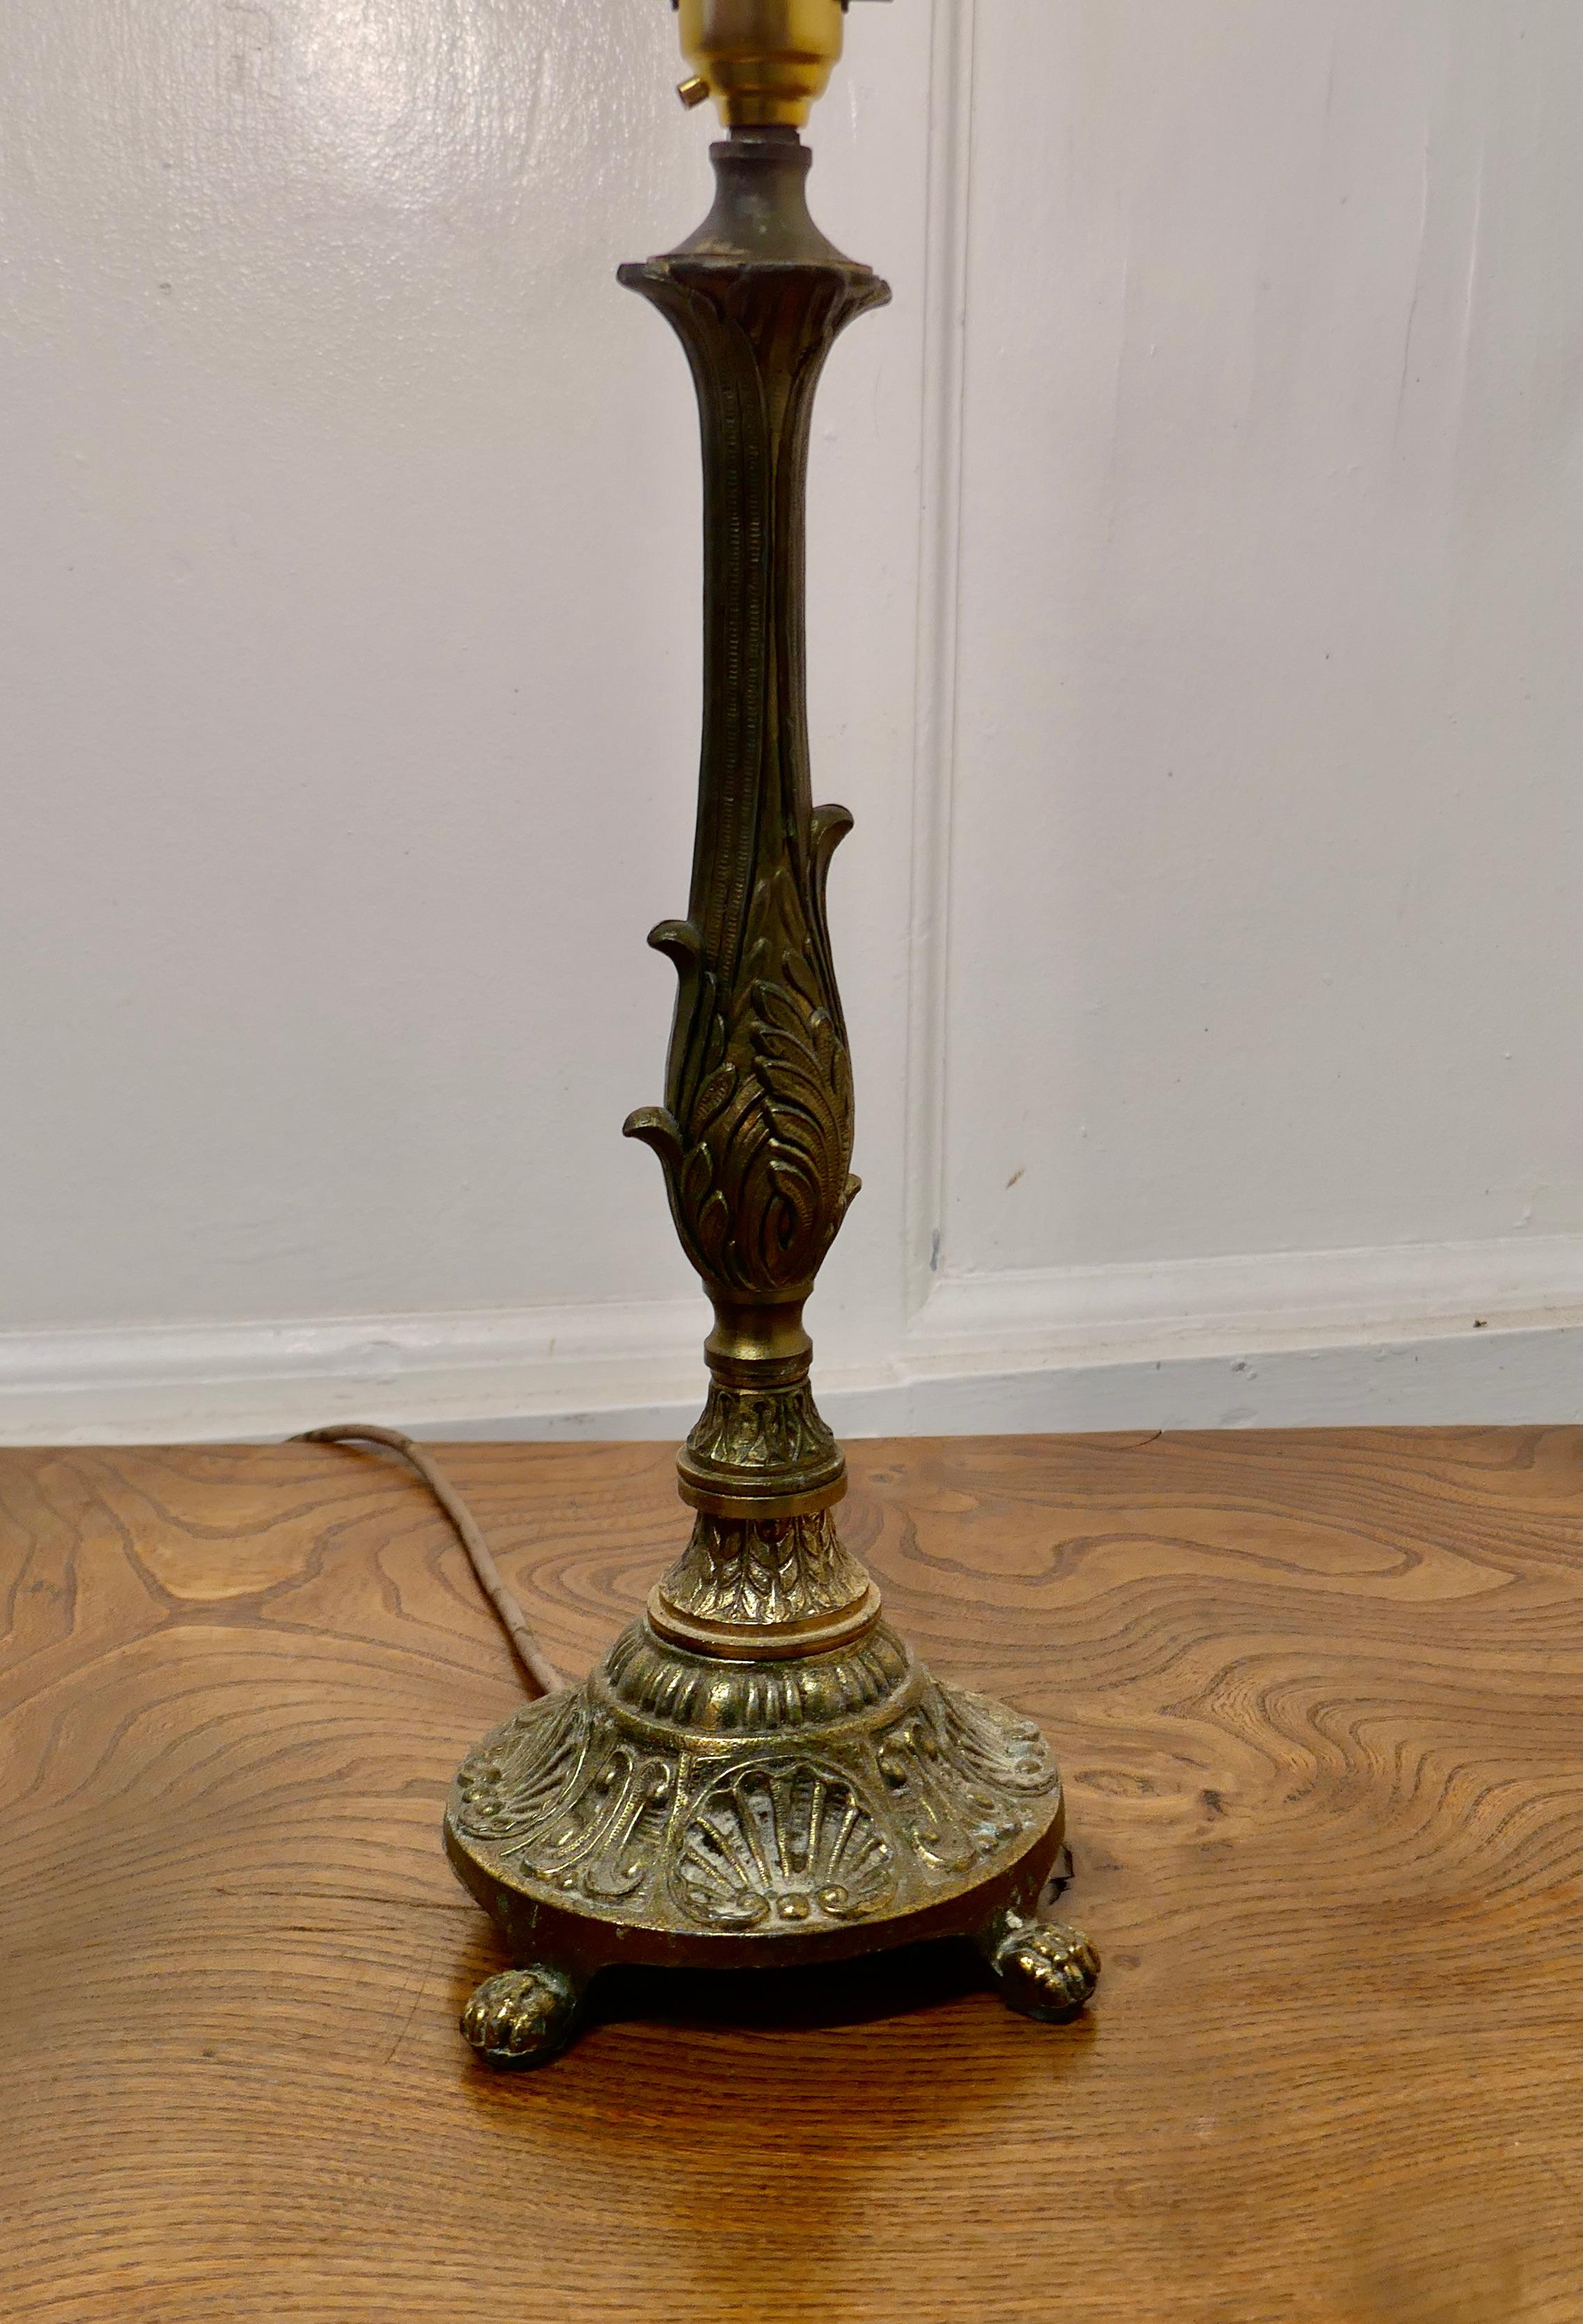 Decorative Chased Brass Table Lamp In Good Condition For Sale In Chillerton, Isle of Wight